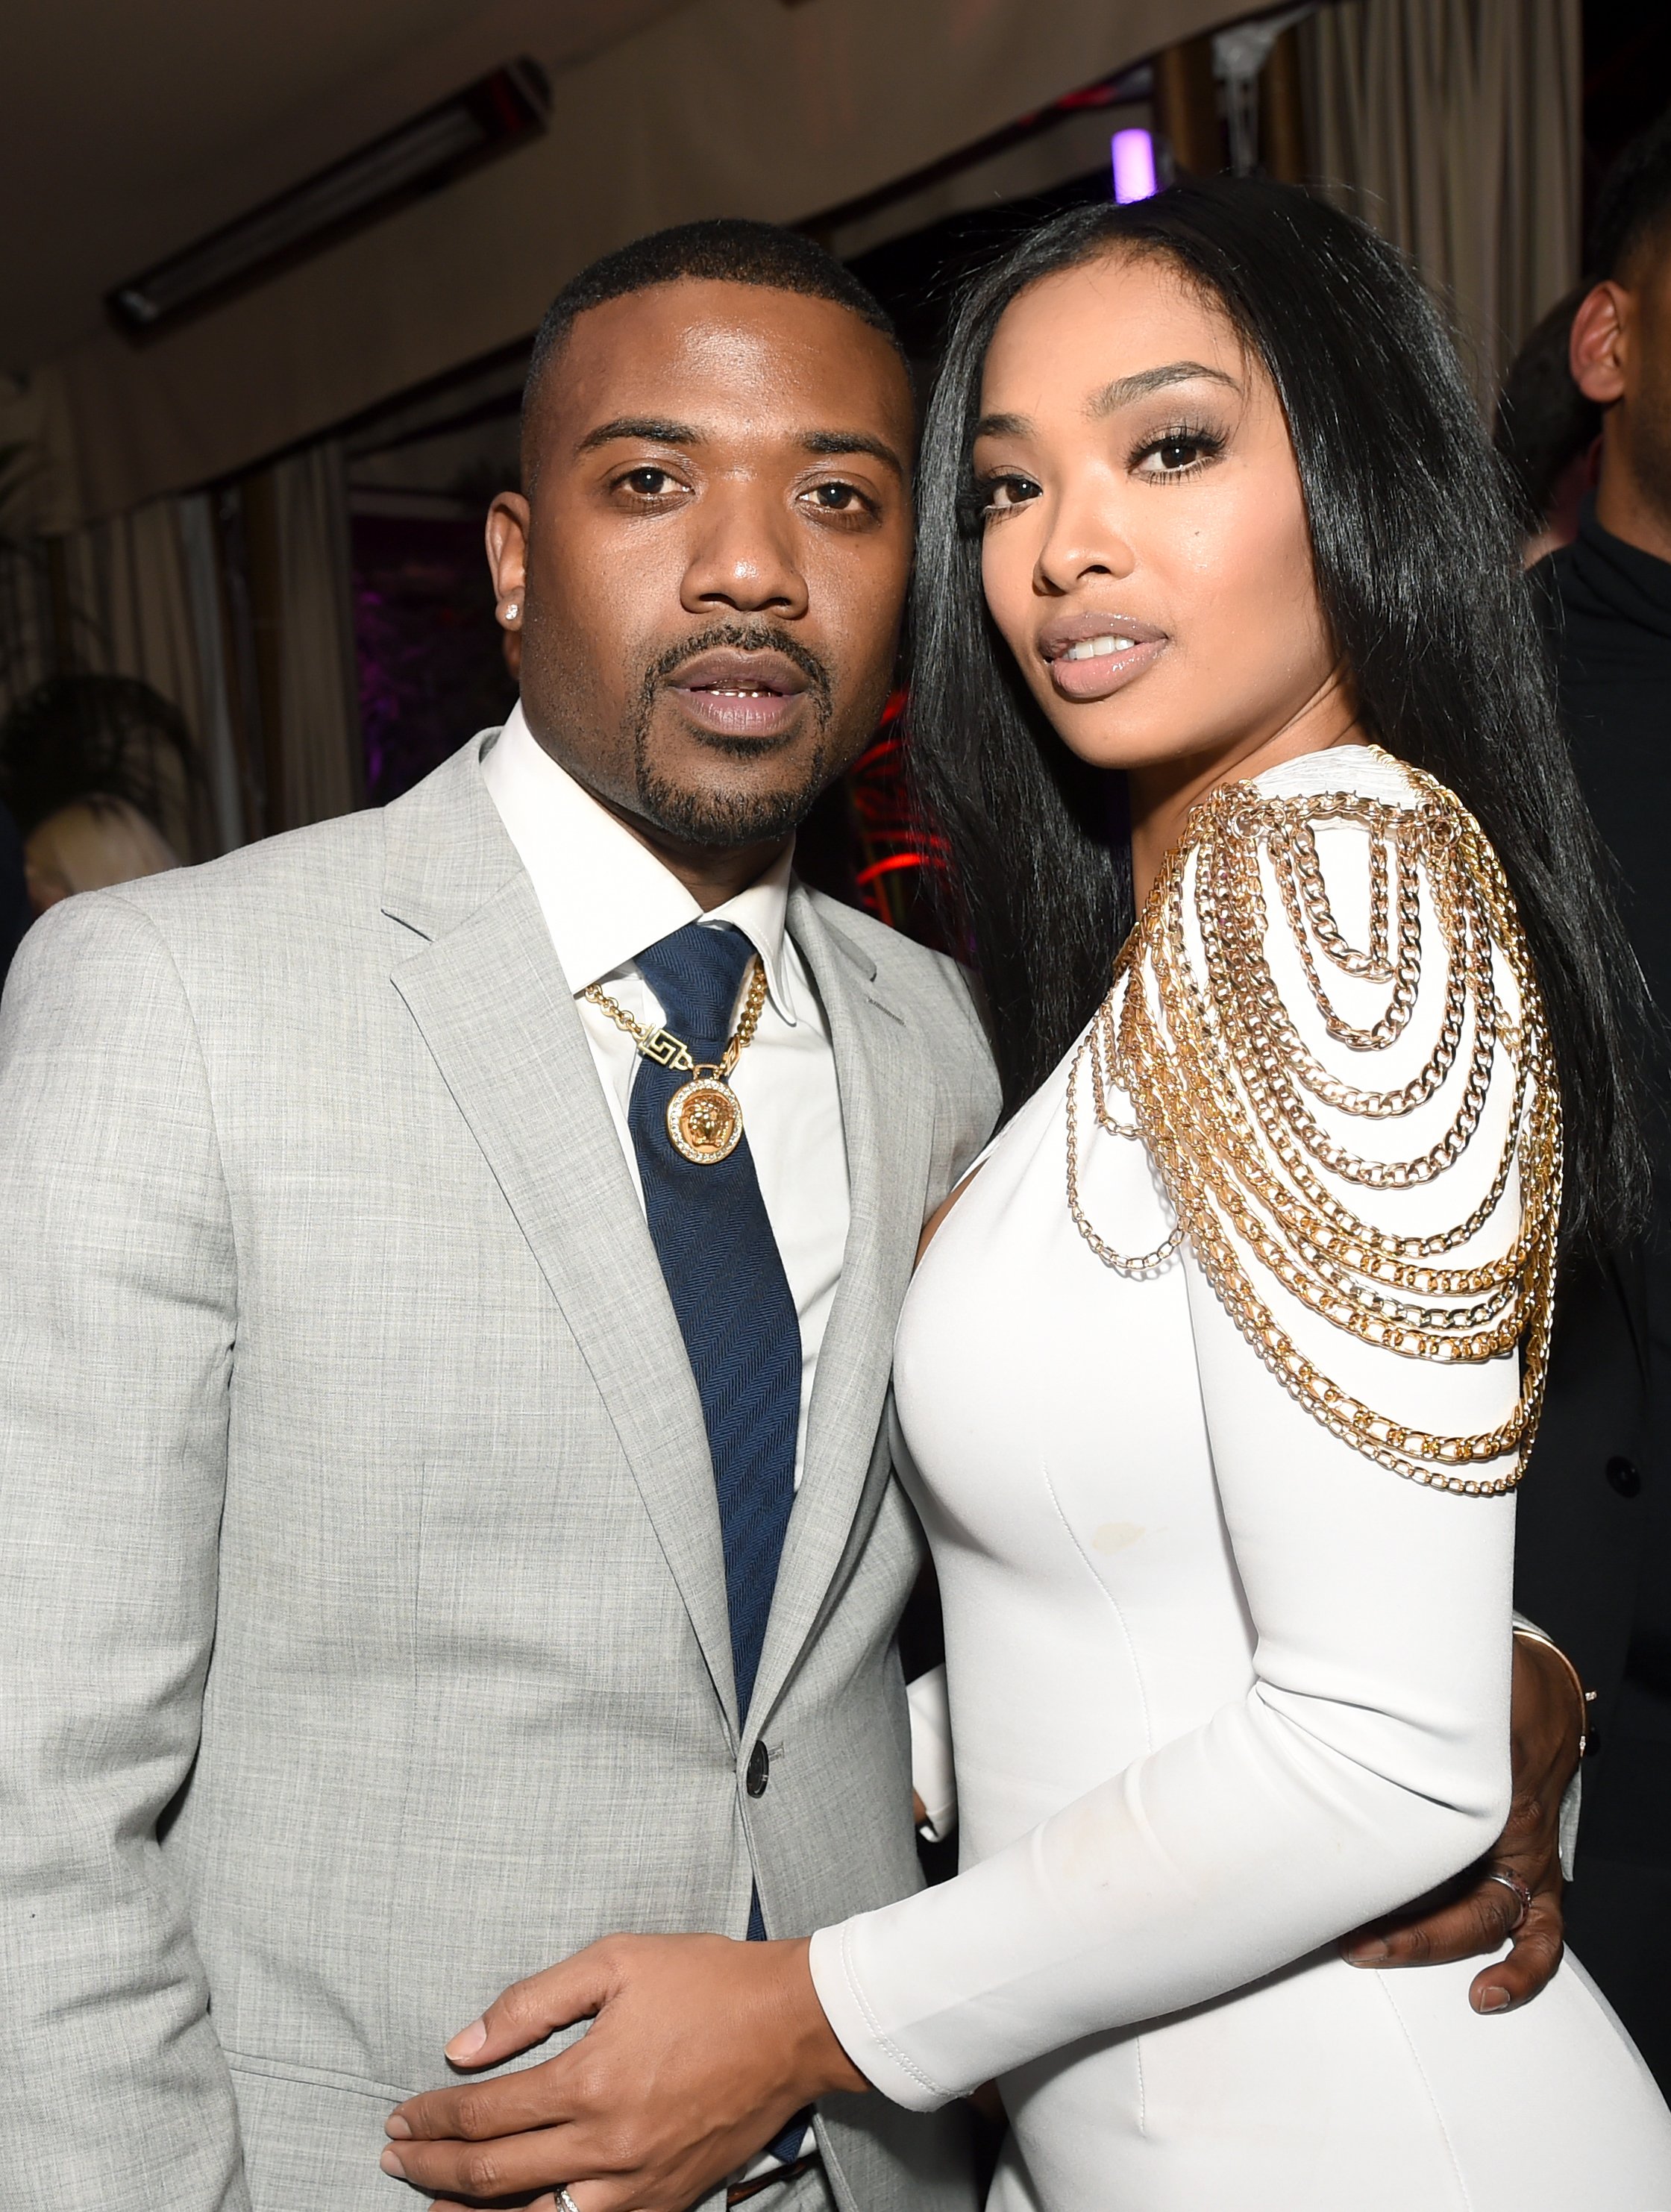 Ray J and wife Princess Love attending a Grammys event in February 2017. | Photo: Getty Images